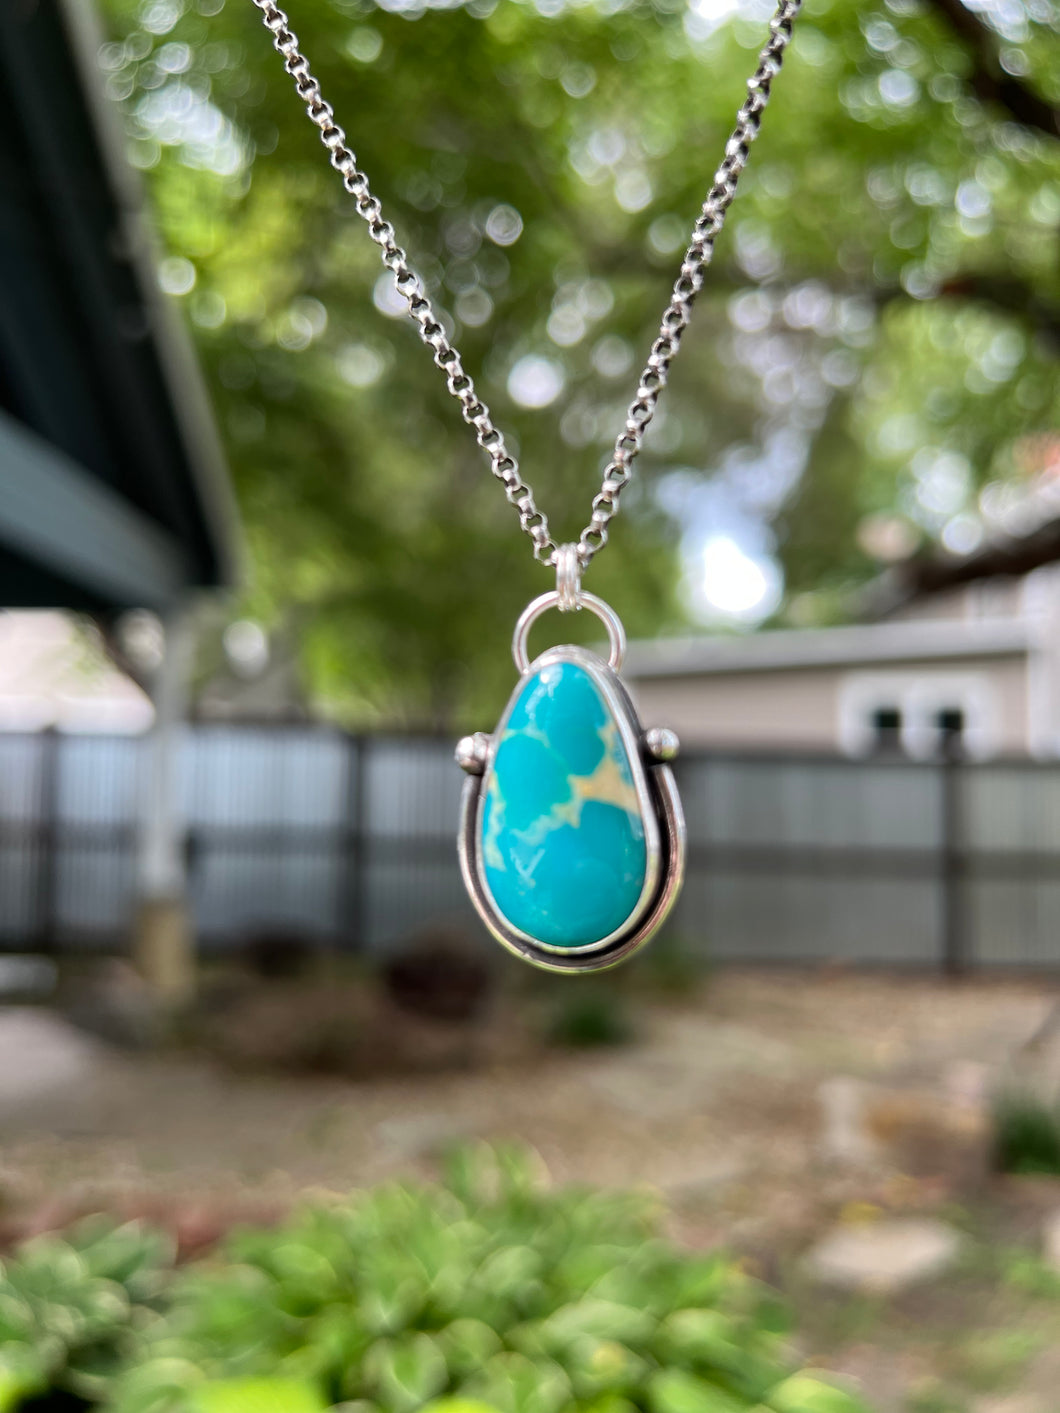 Teal Blue Royston Turquoise Pendant Necklace - 18